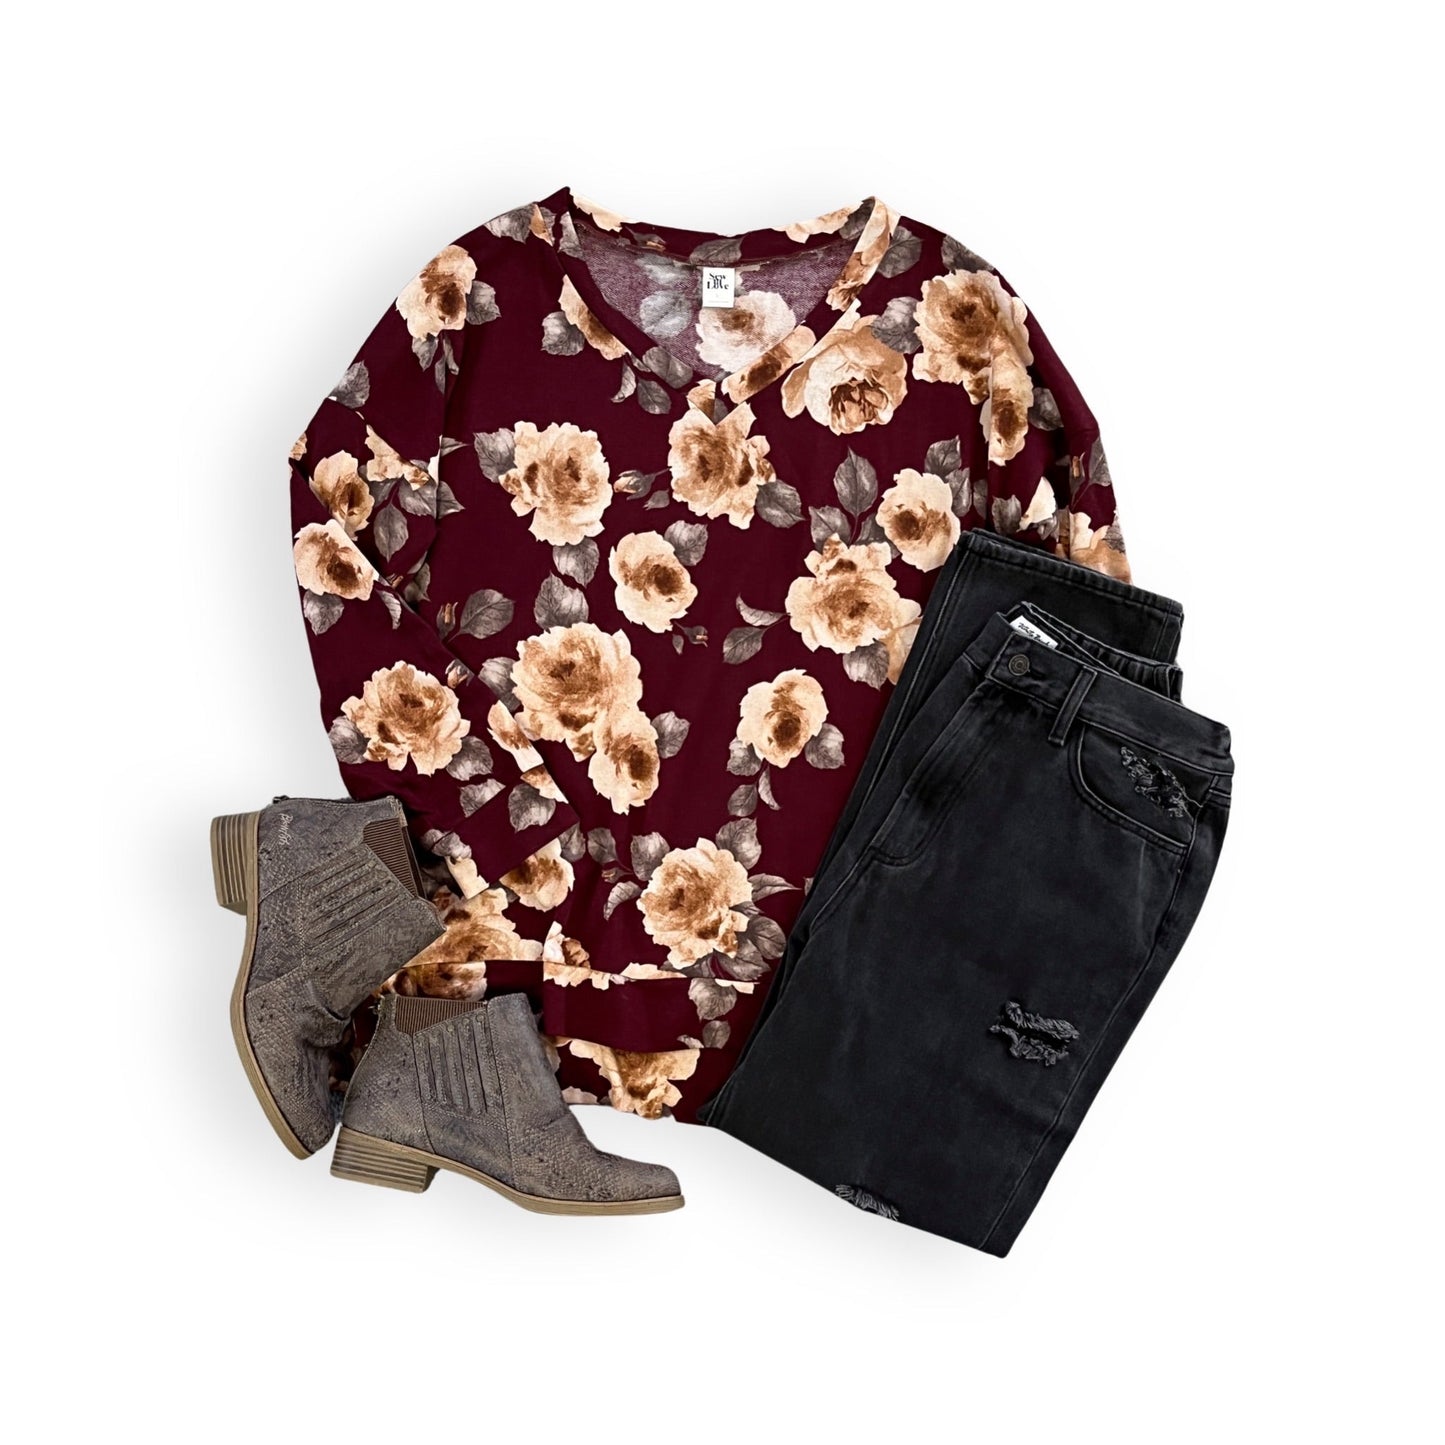 A Class Act Floral Sweater